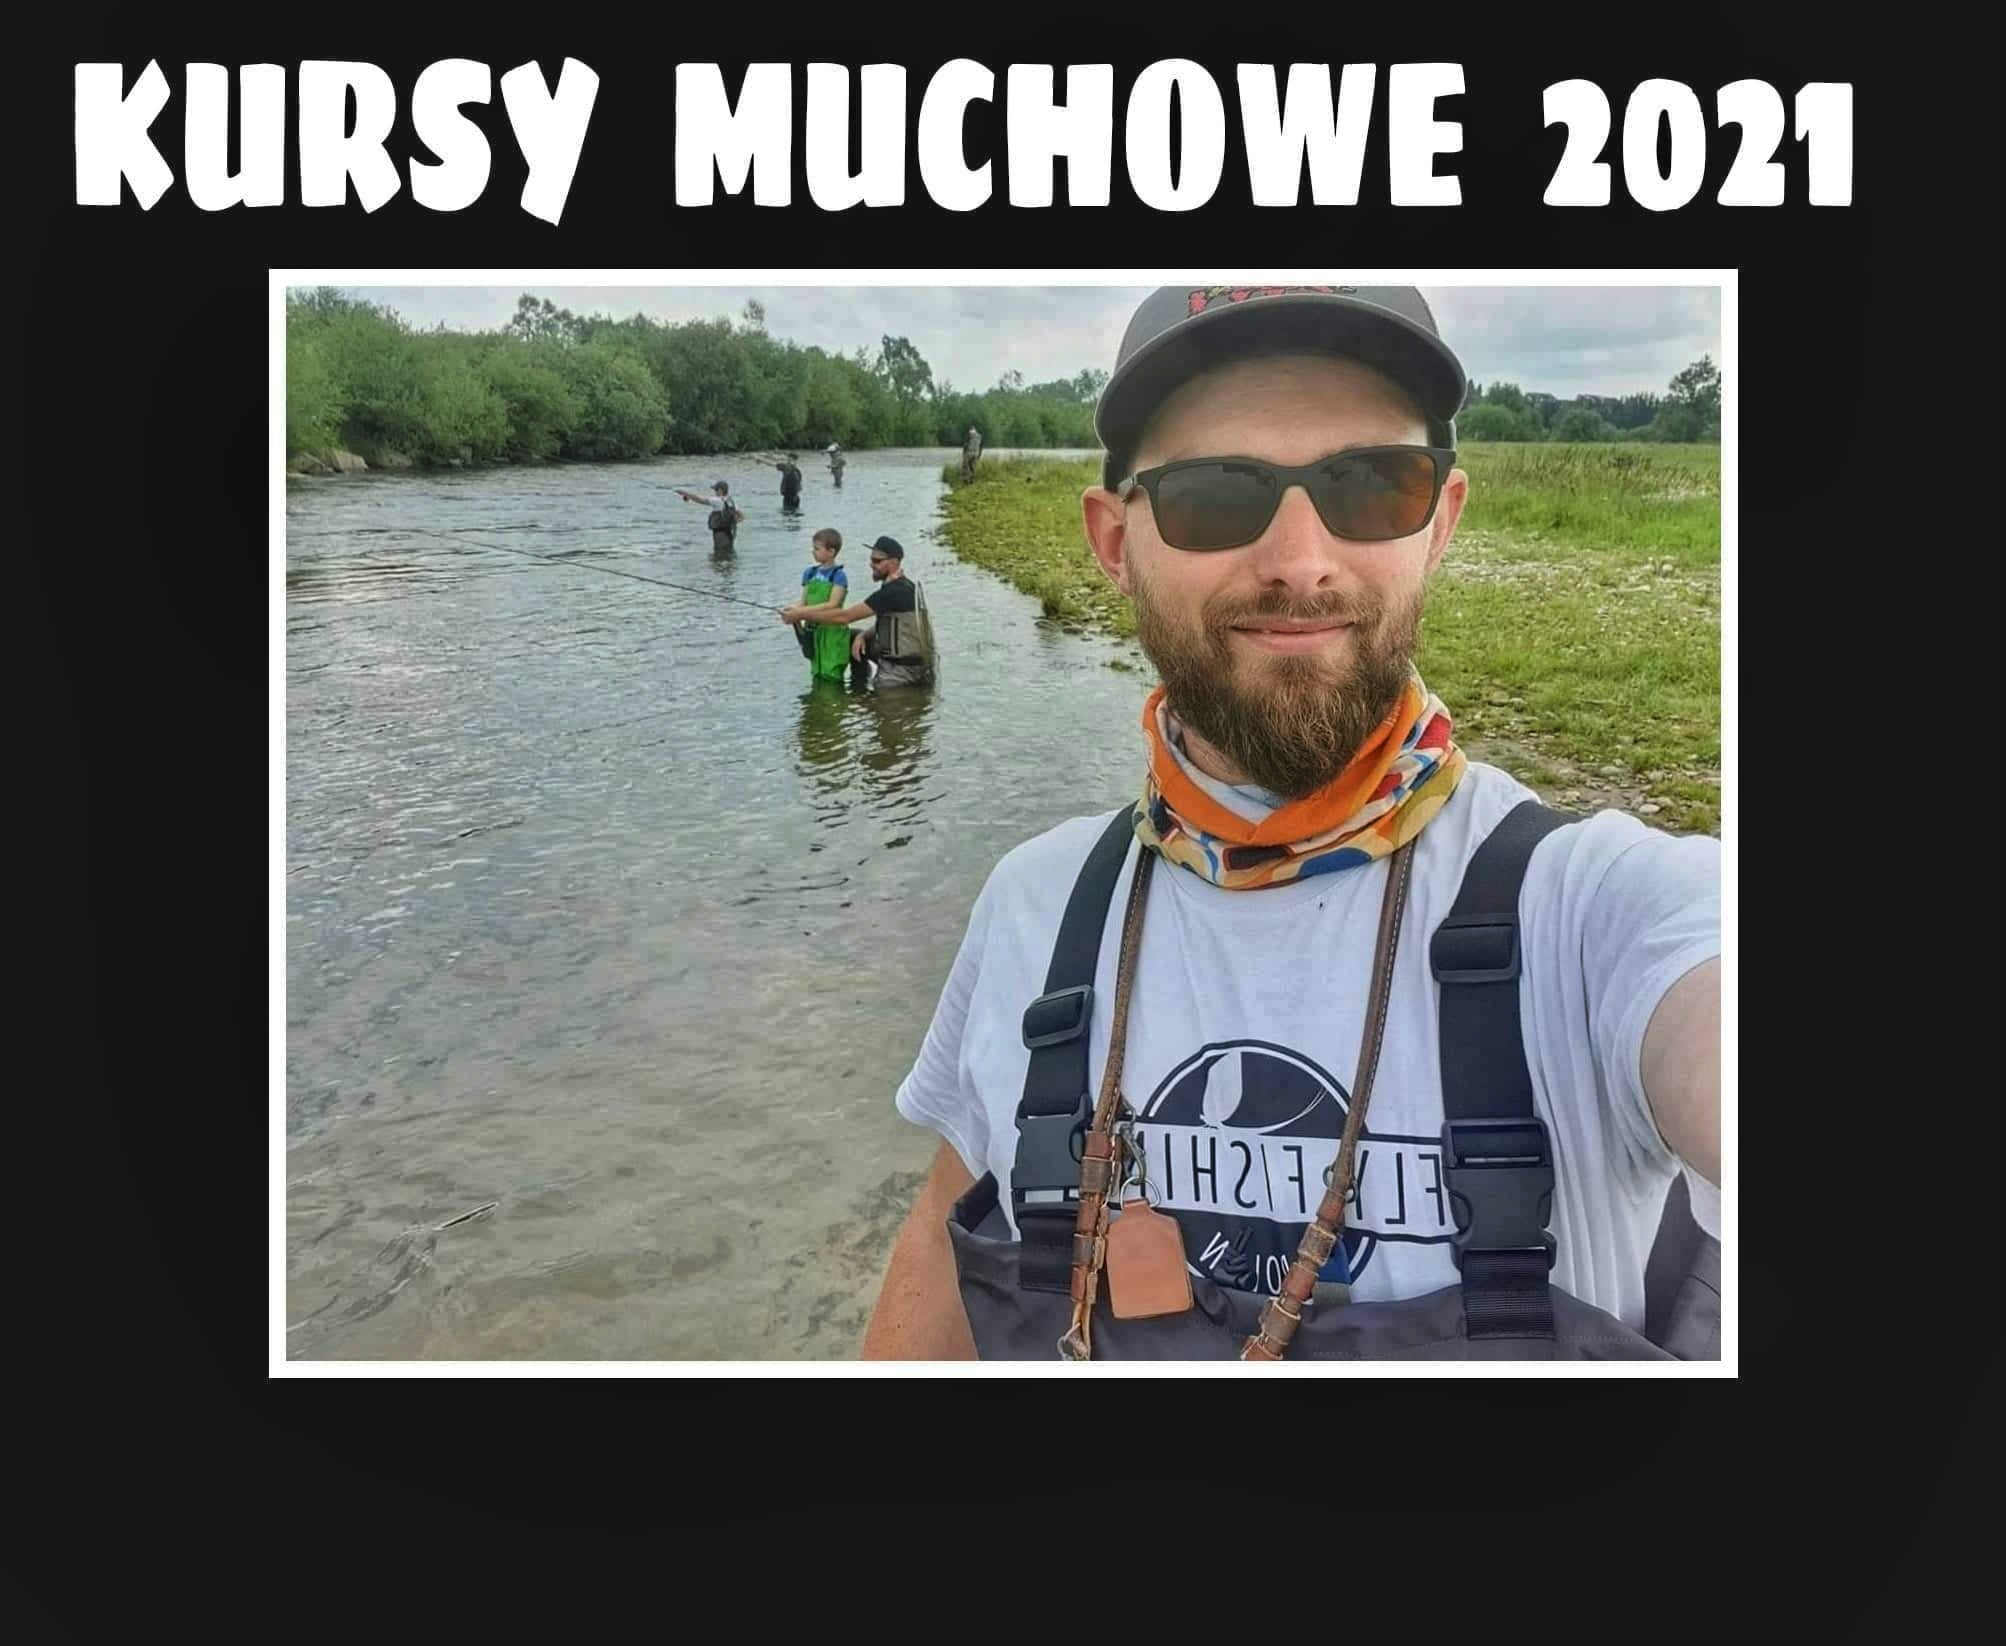 You are currently viewing Kursy muchowe!